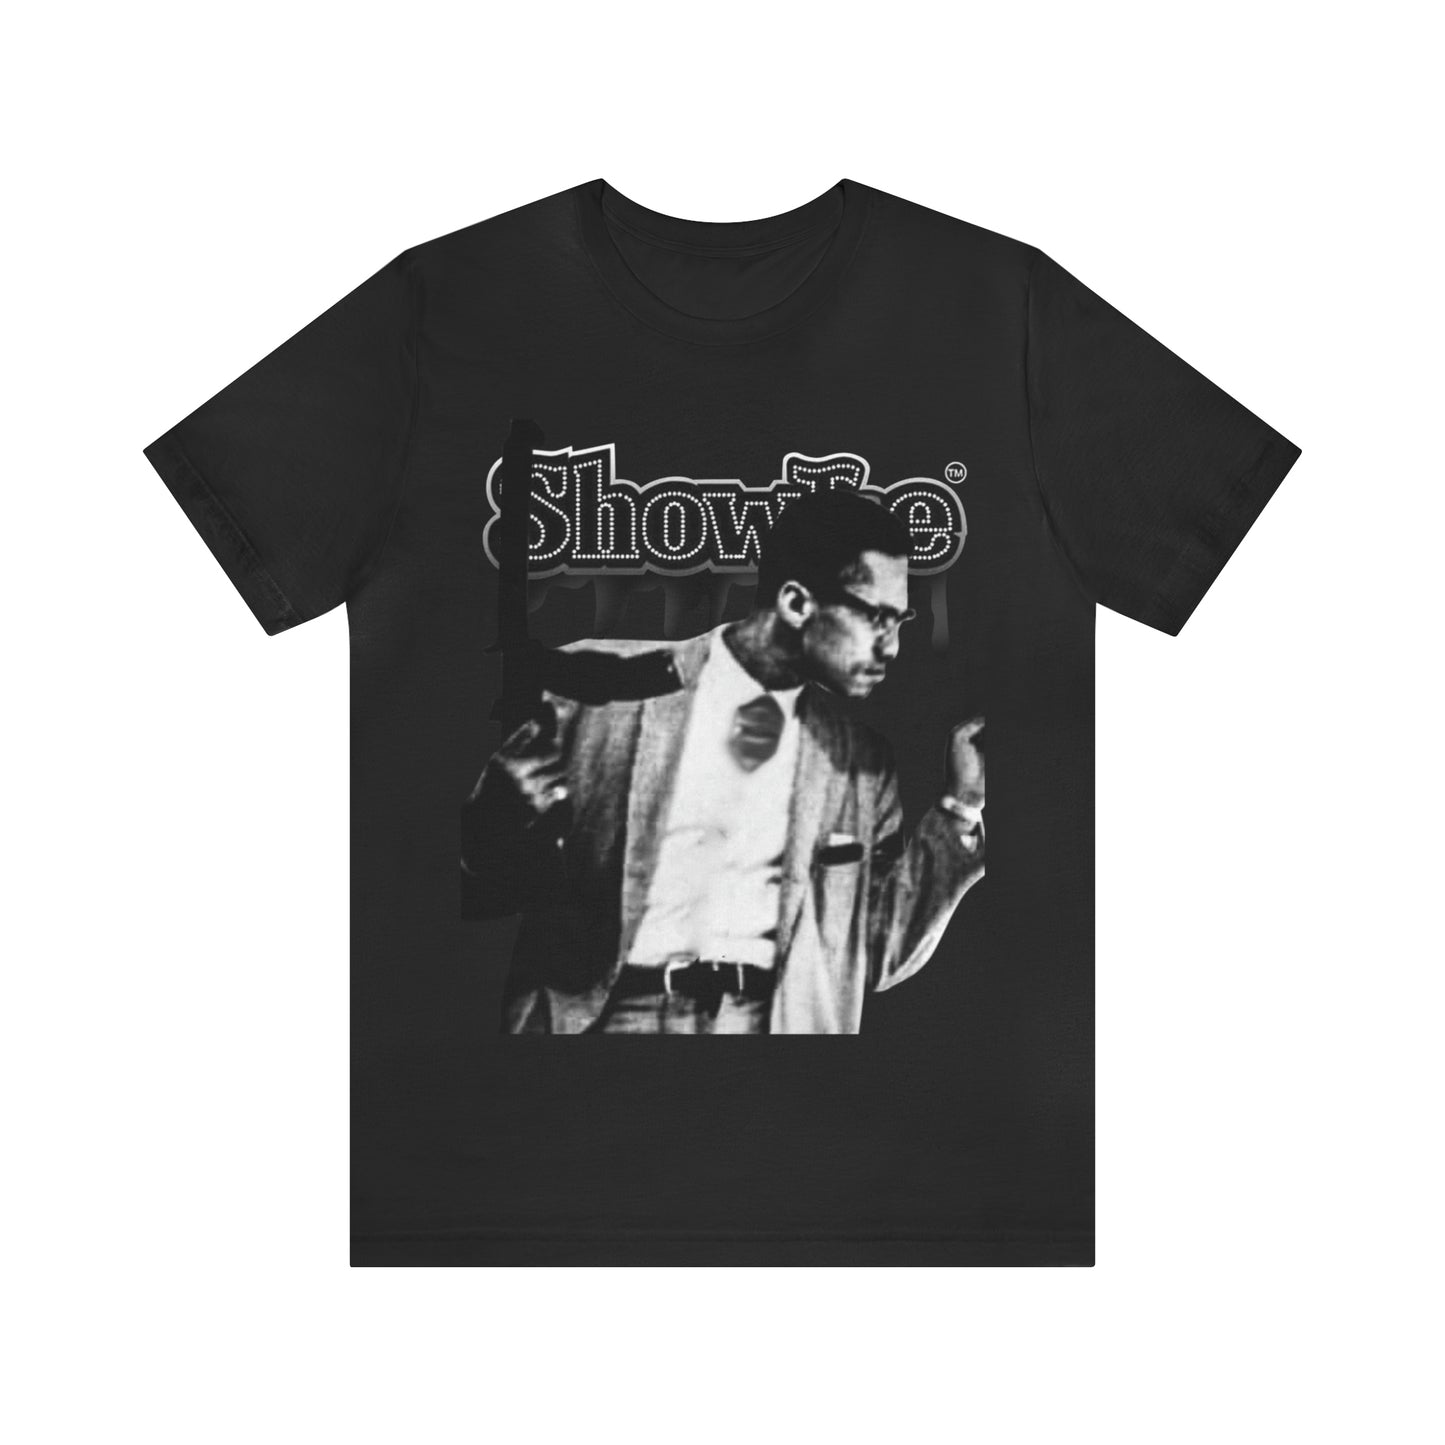 Looking for the  Short Sleeve Tee